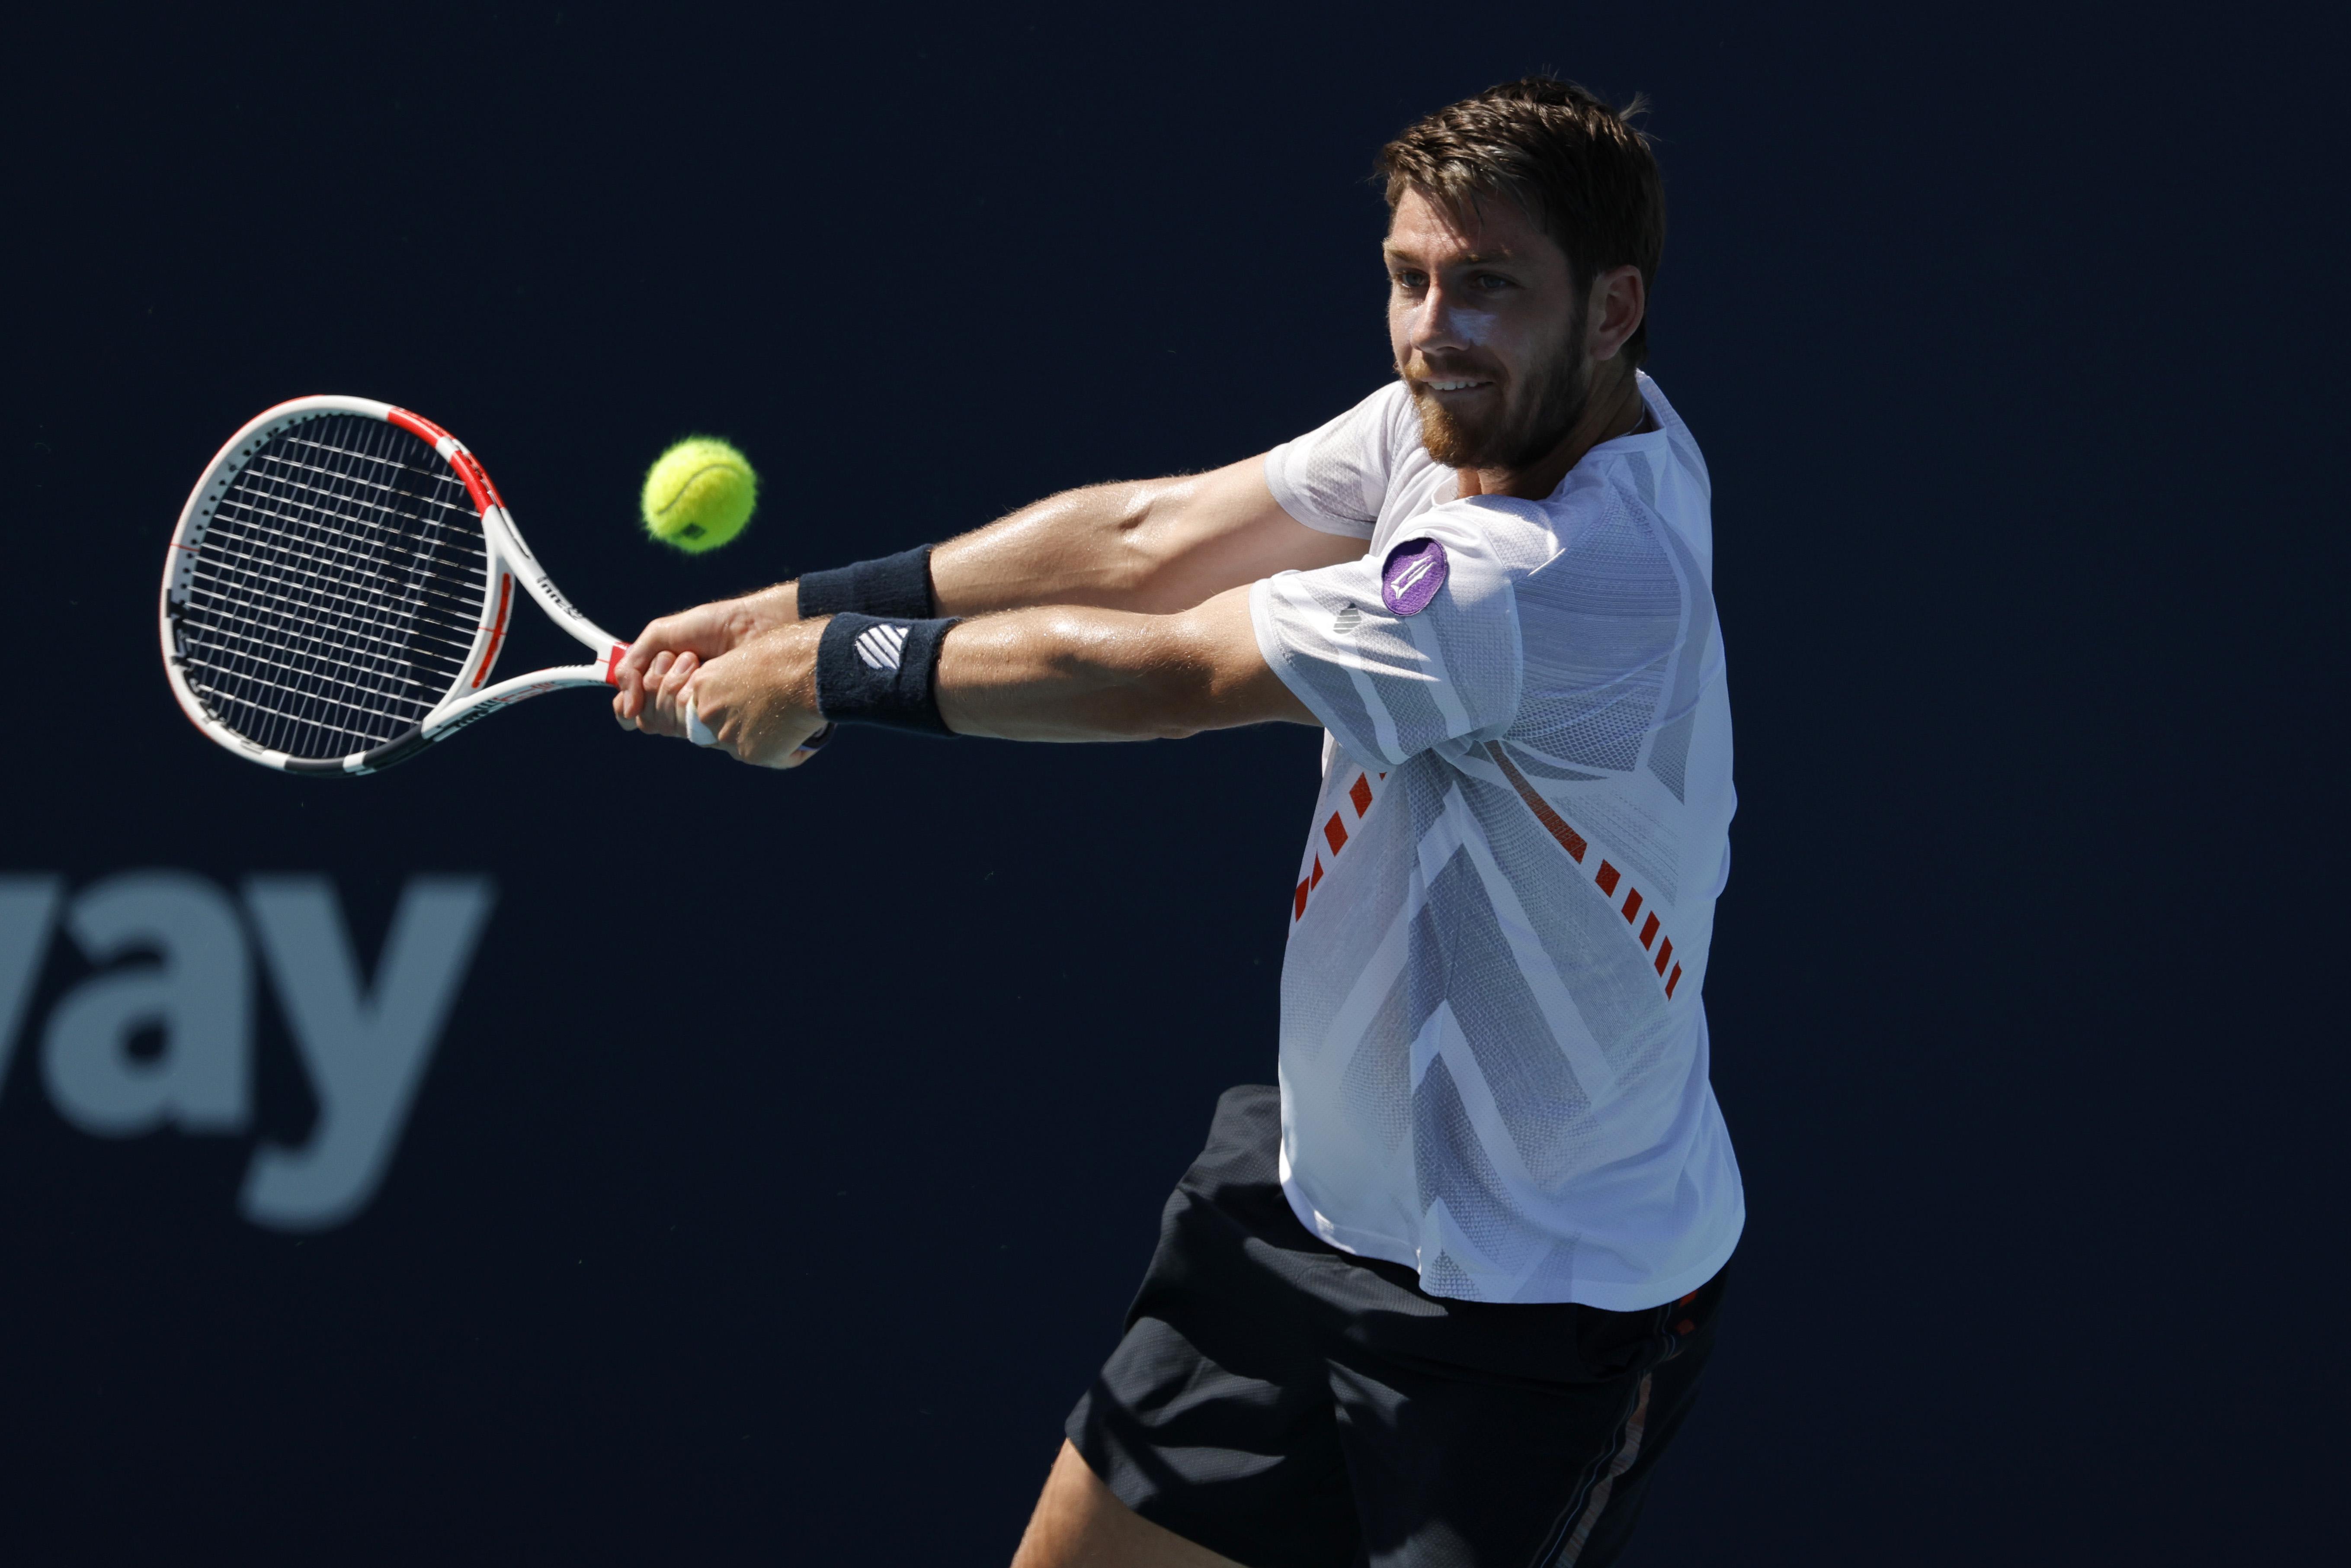 Cameron Norrie vs Tommy Paul Odds, Prediction and Betting Trends for 2022 Wimbledon Men's Round of 16 Match